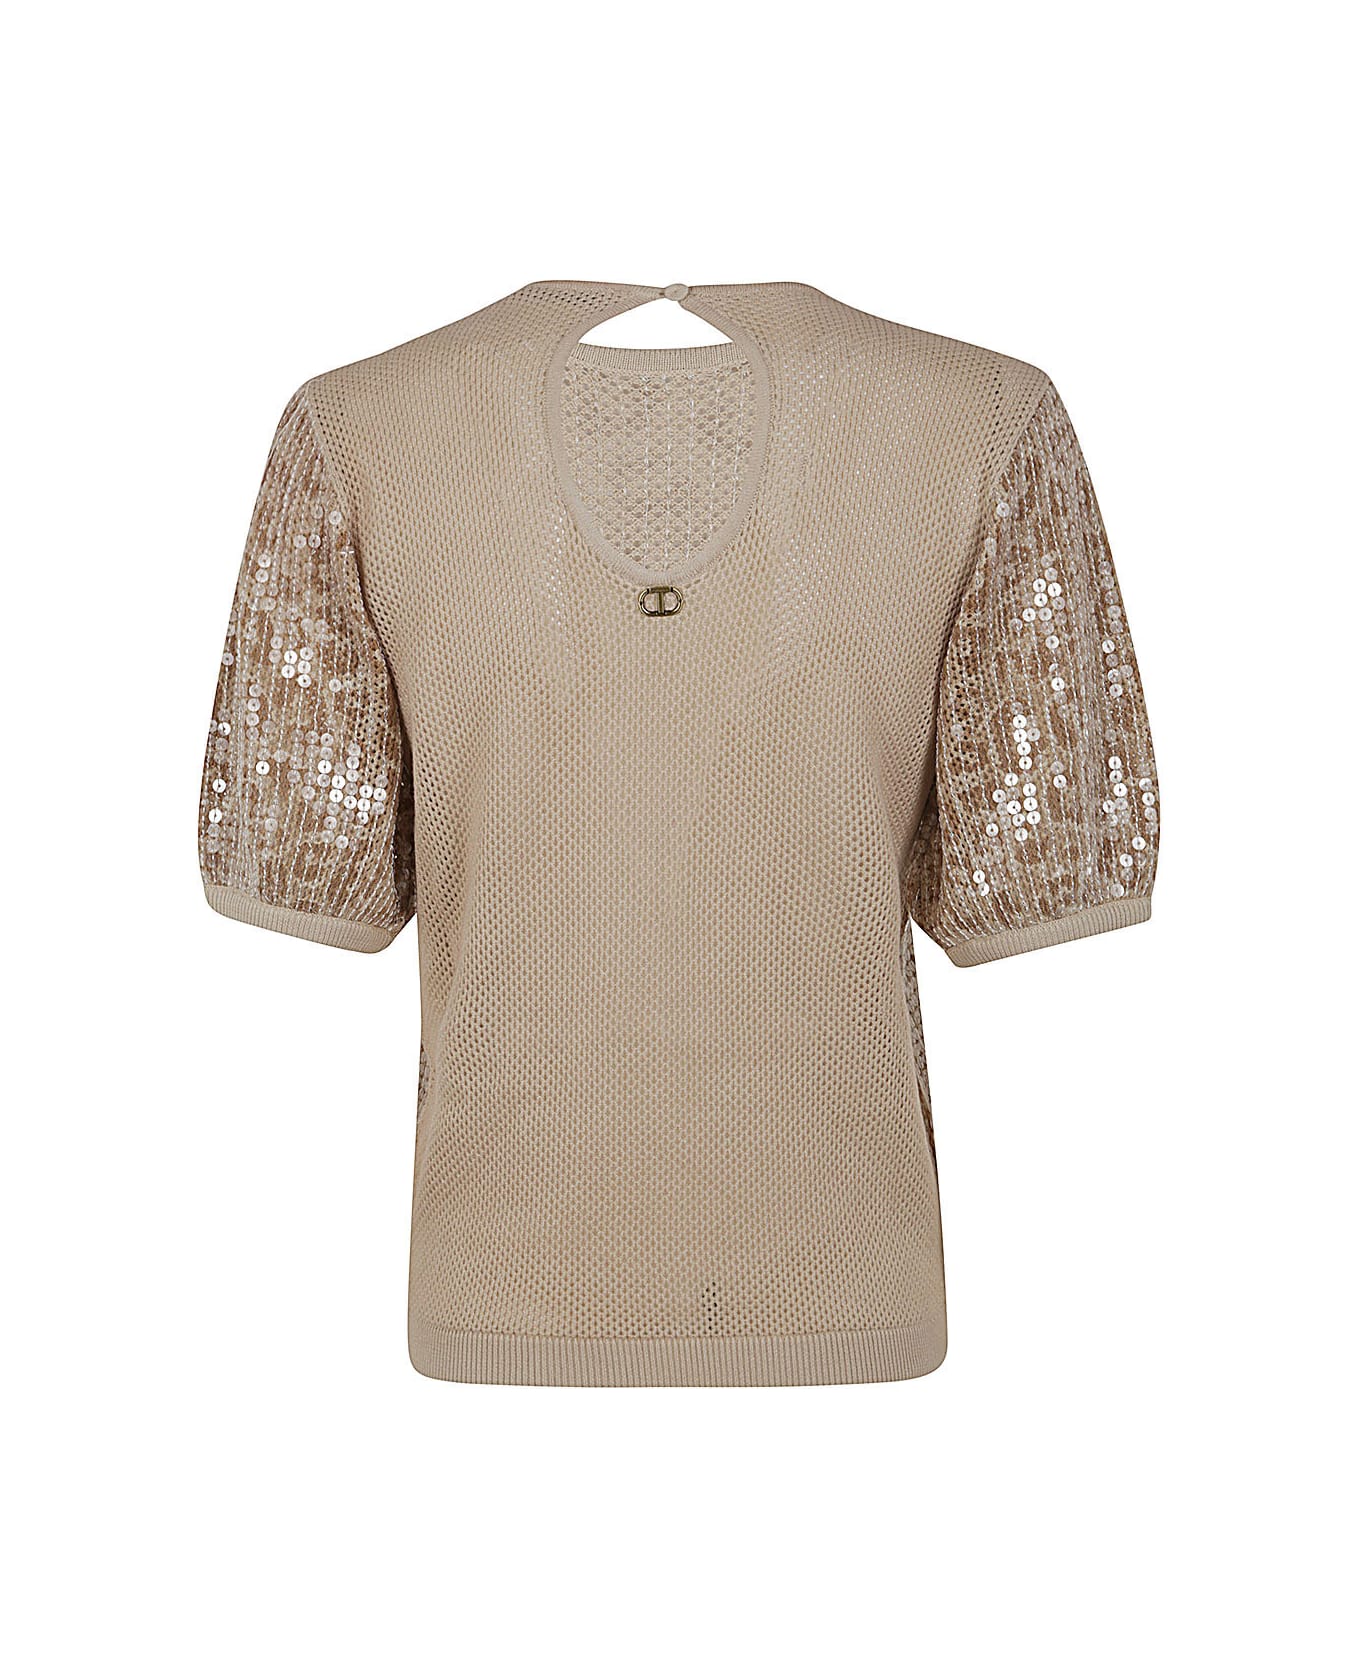 TwinSet Short Sleeve Sequined Pullover - Ginger Root